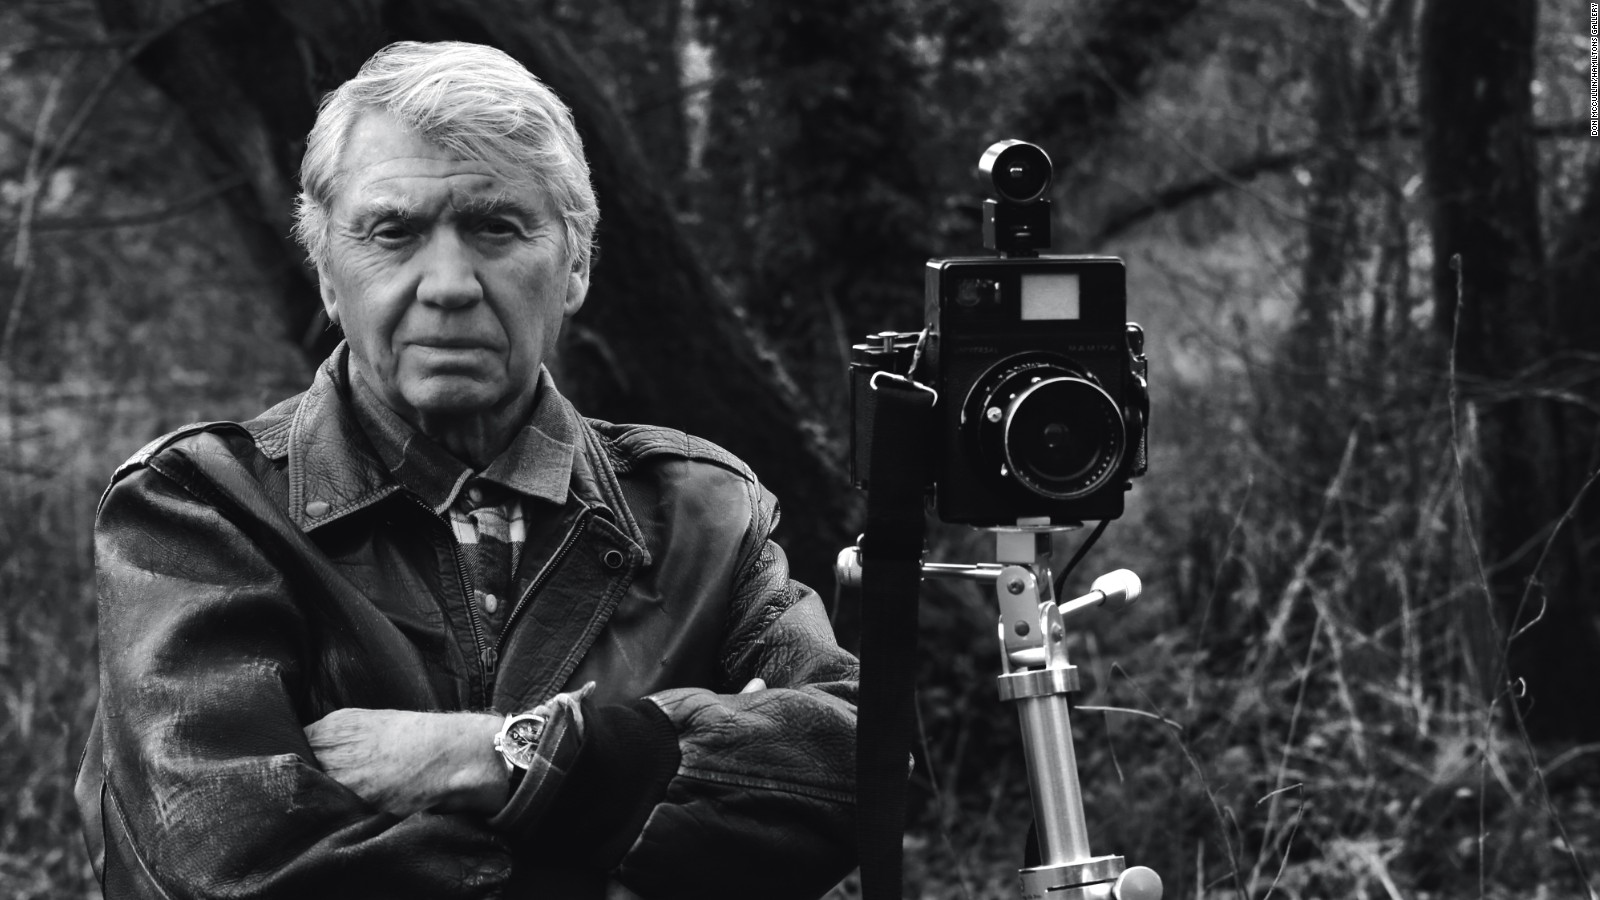 Photojournalist Don McCullin reflects on life on the front line - CNN